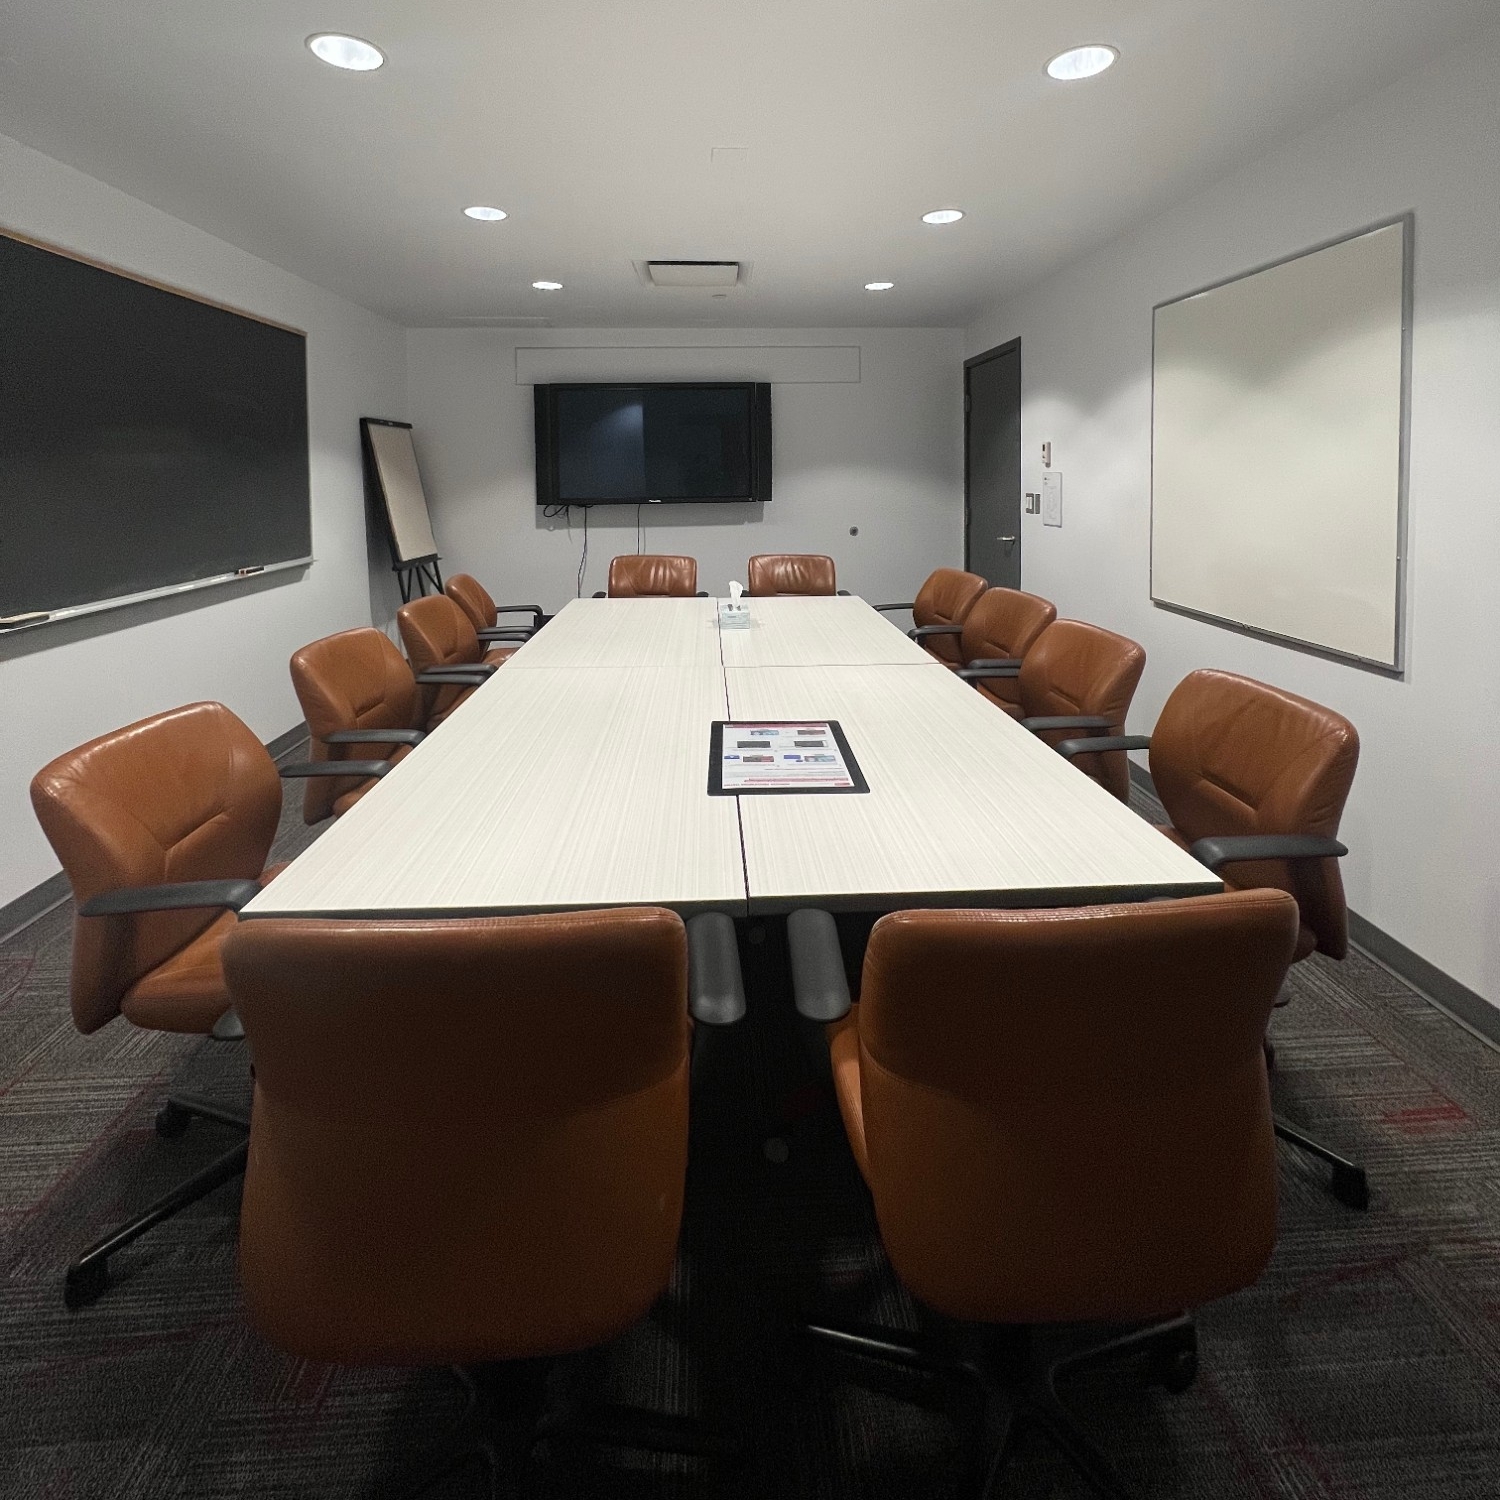 Small, enclosed meeting space with table, chairs, whiteboard, chalkboard, and monitor